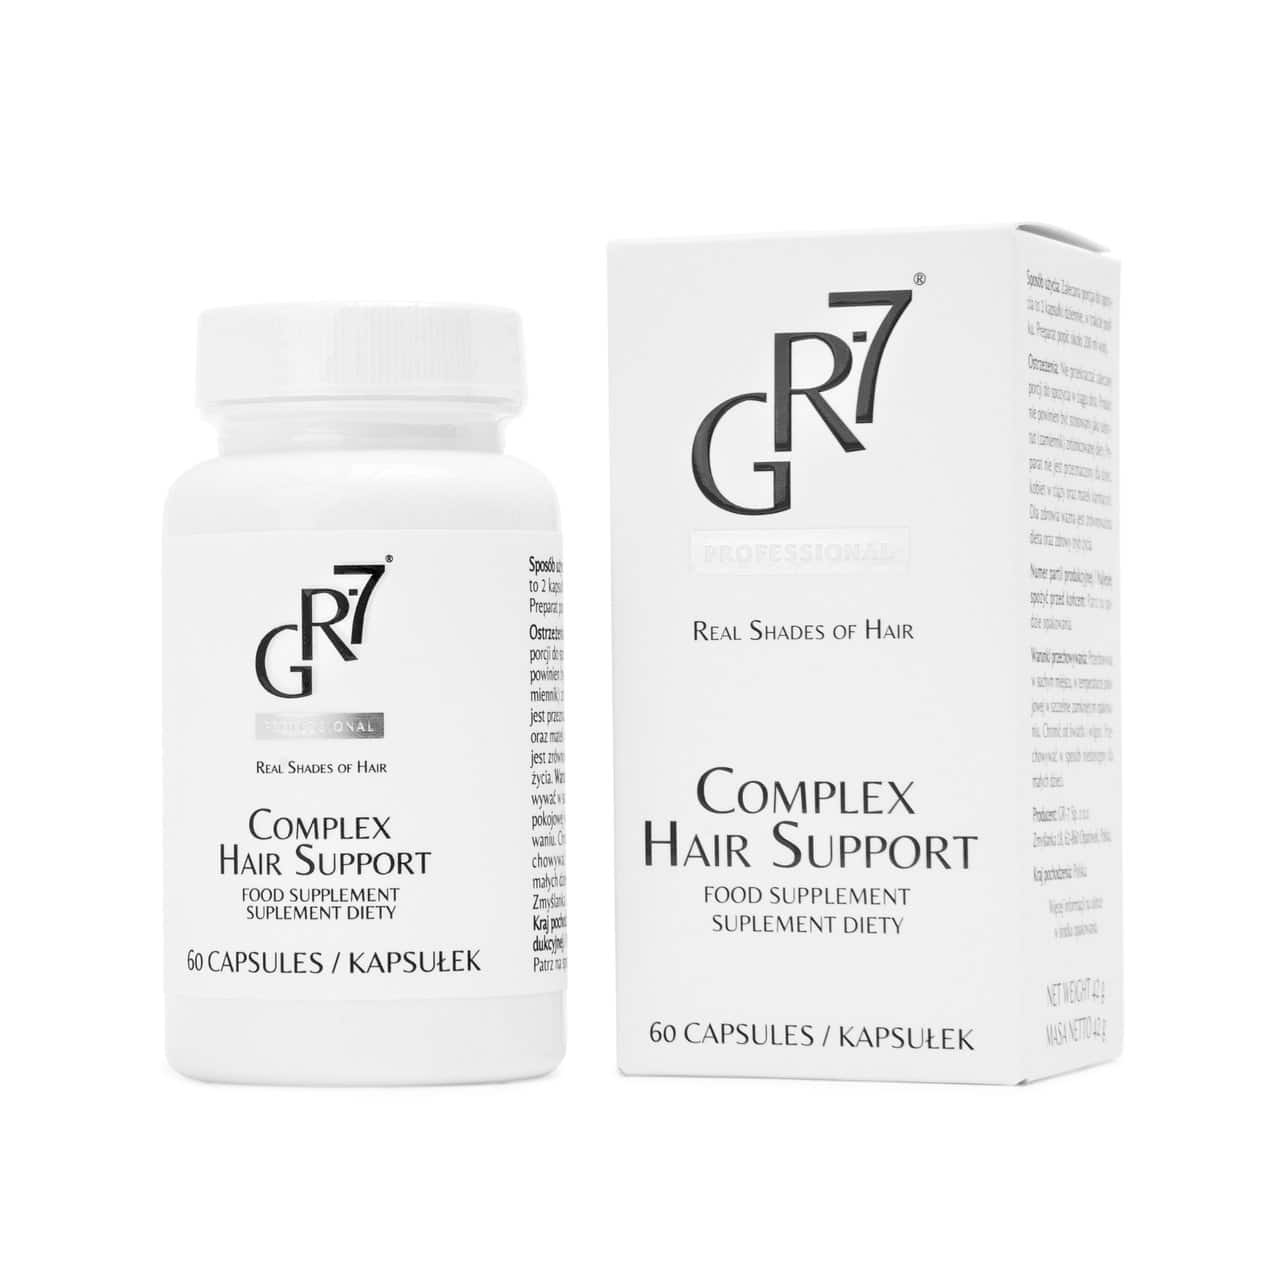 GR-7 Professional Complex hair support